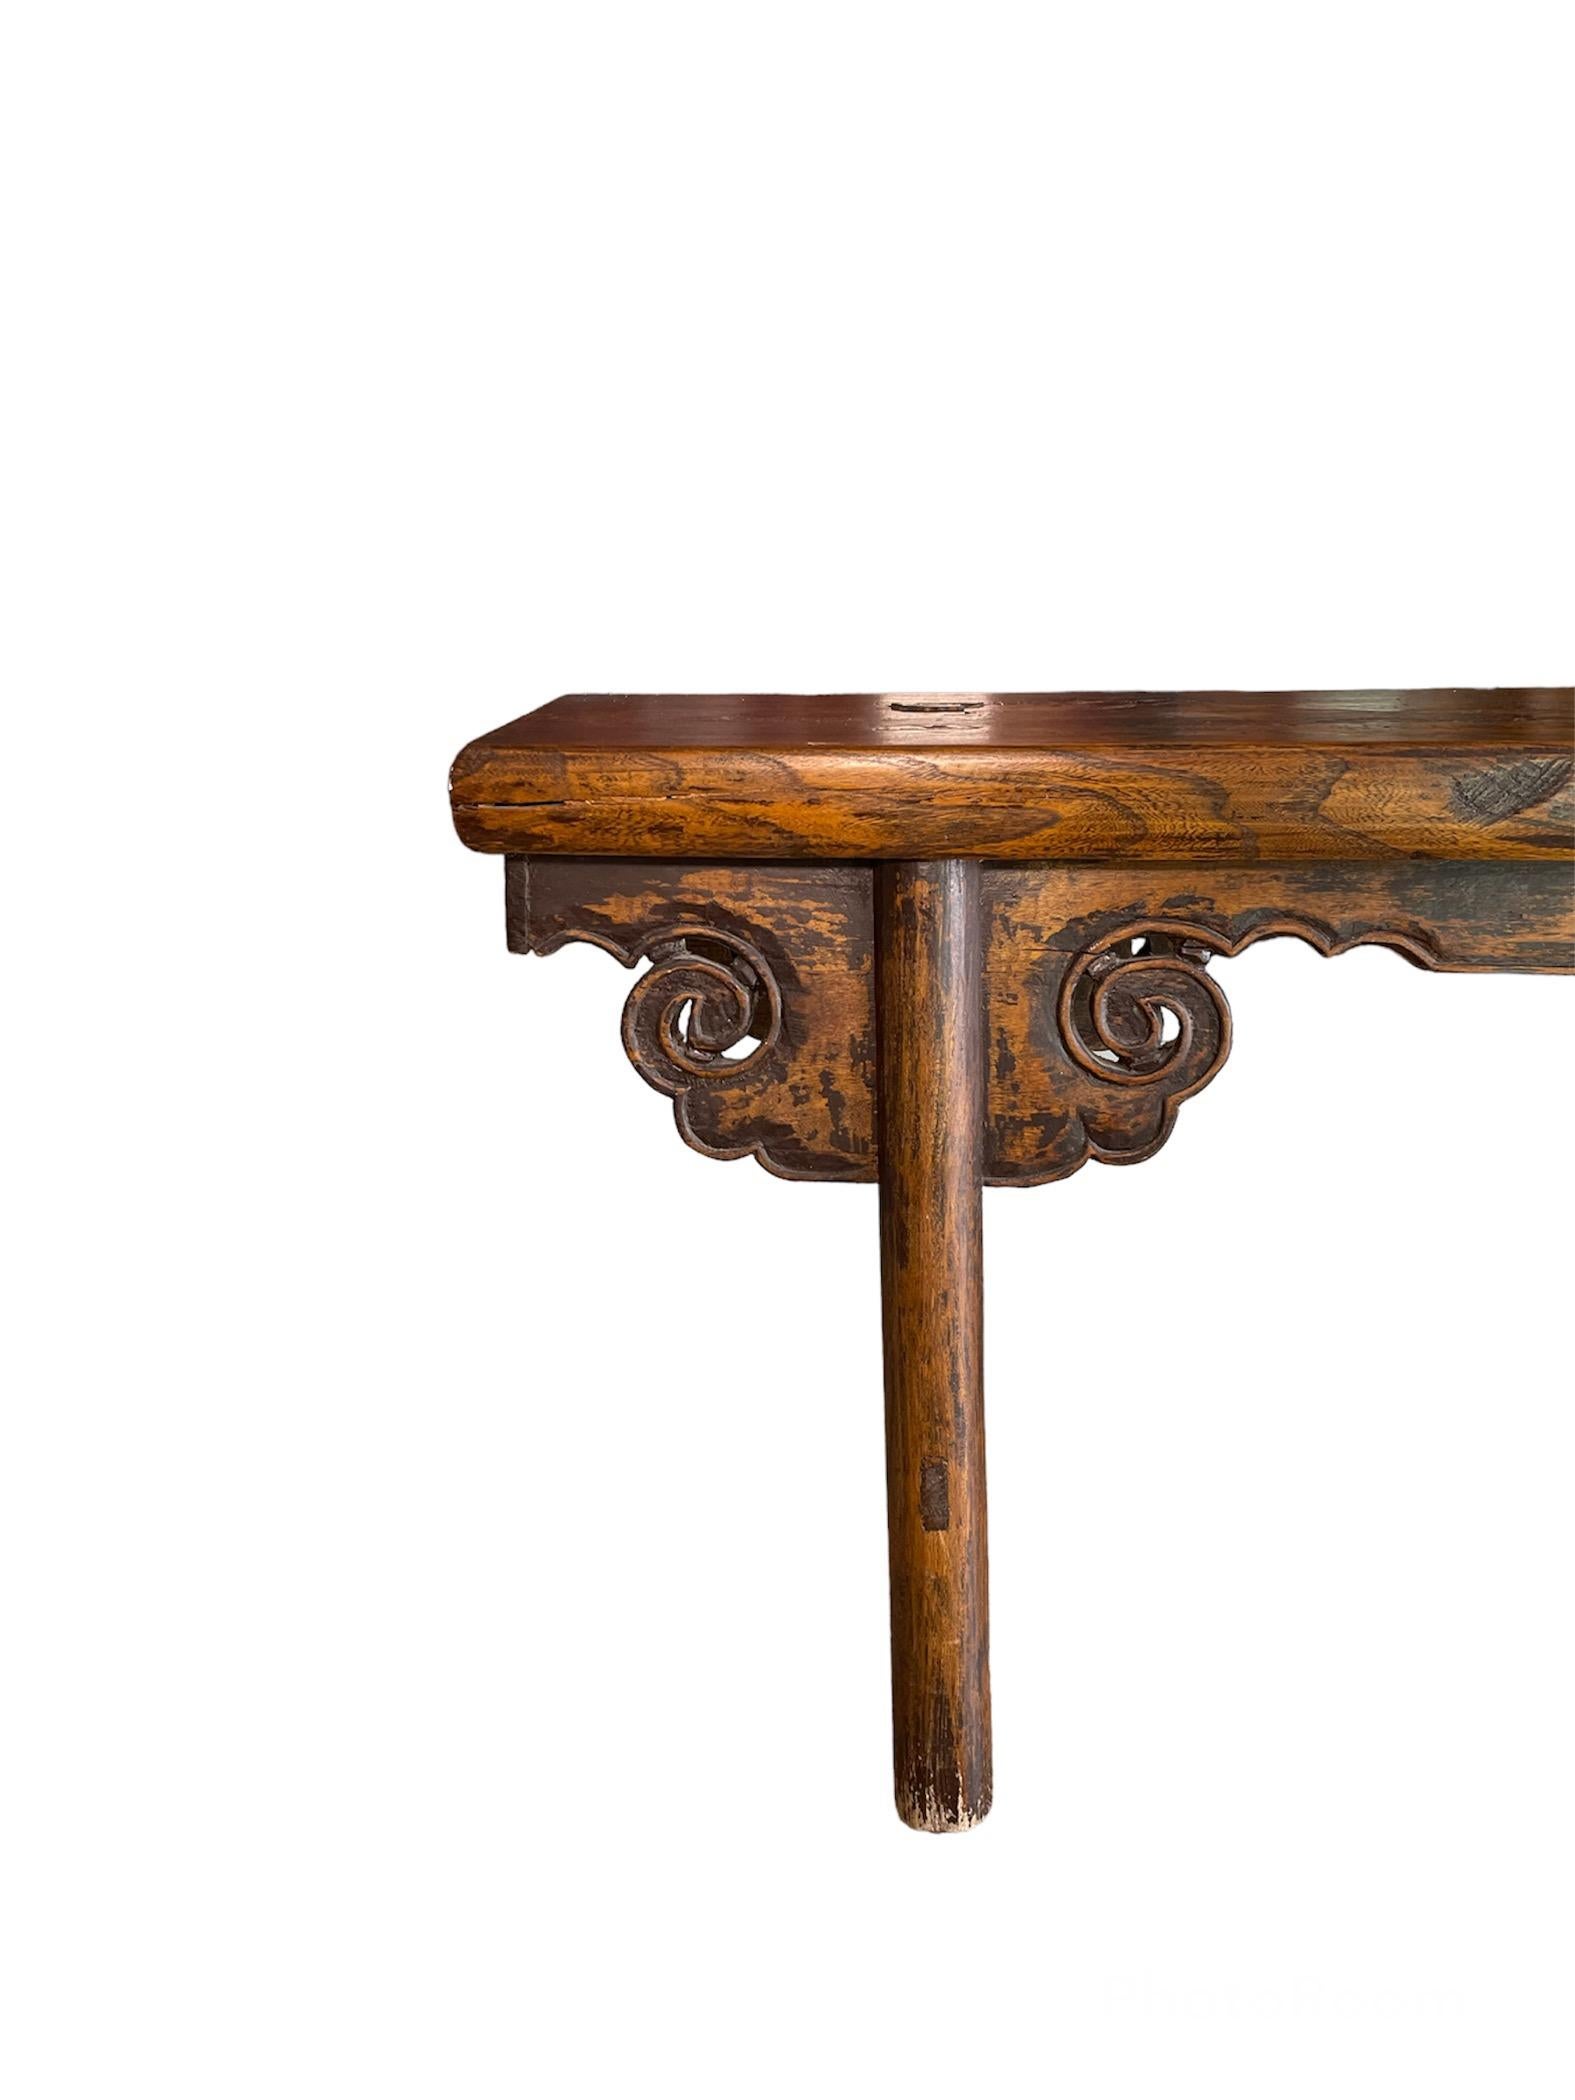 This is a Chinese countryside hand crafted wood bench. It depicts a small rectangular top with two pair of cylindrical legs joined by stretchers. Below the top, there is a skirt with scalloped border that surrounds the table and ends with scrolls at